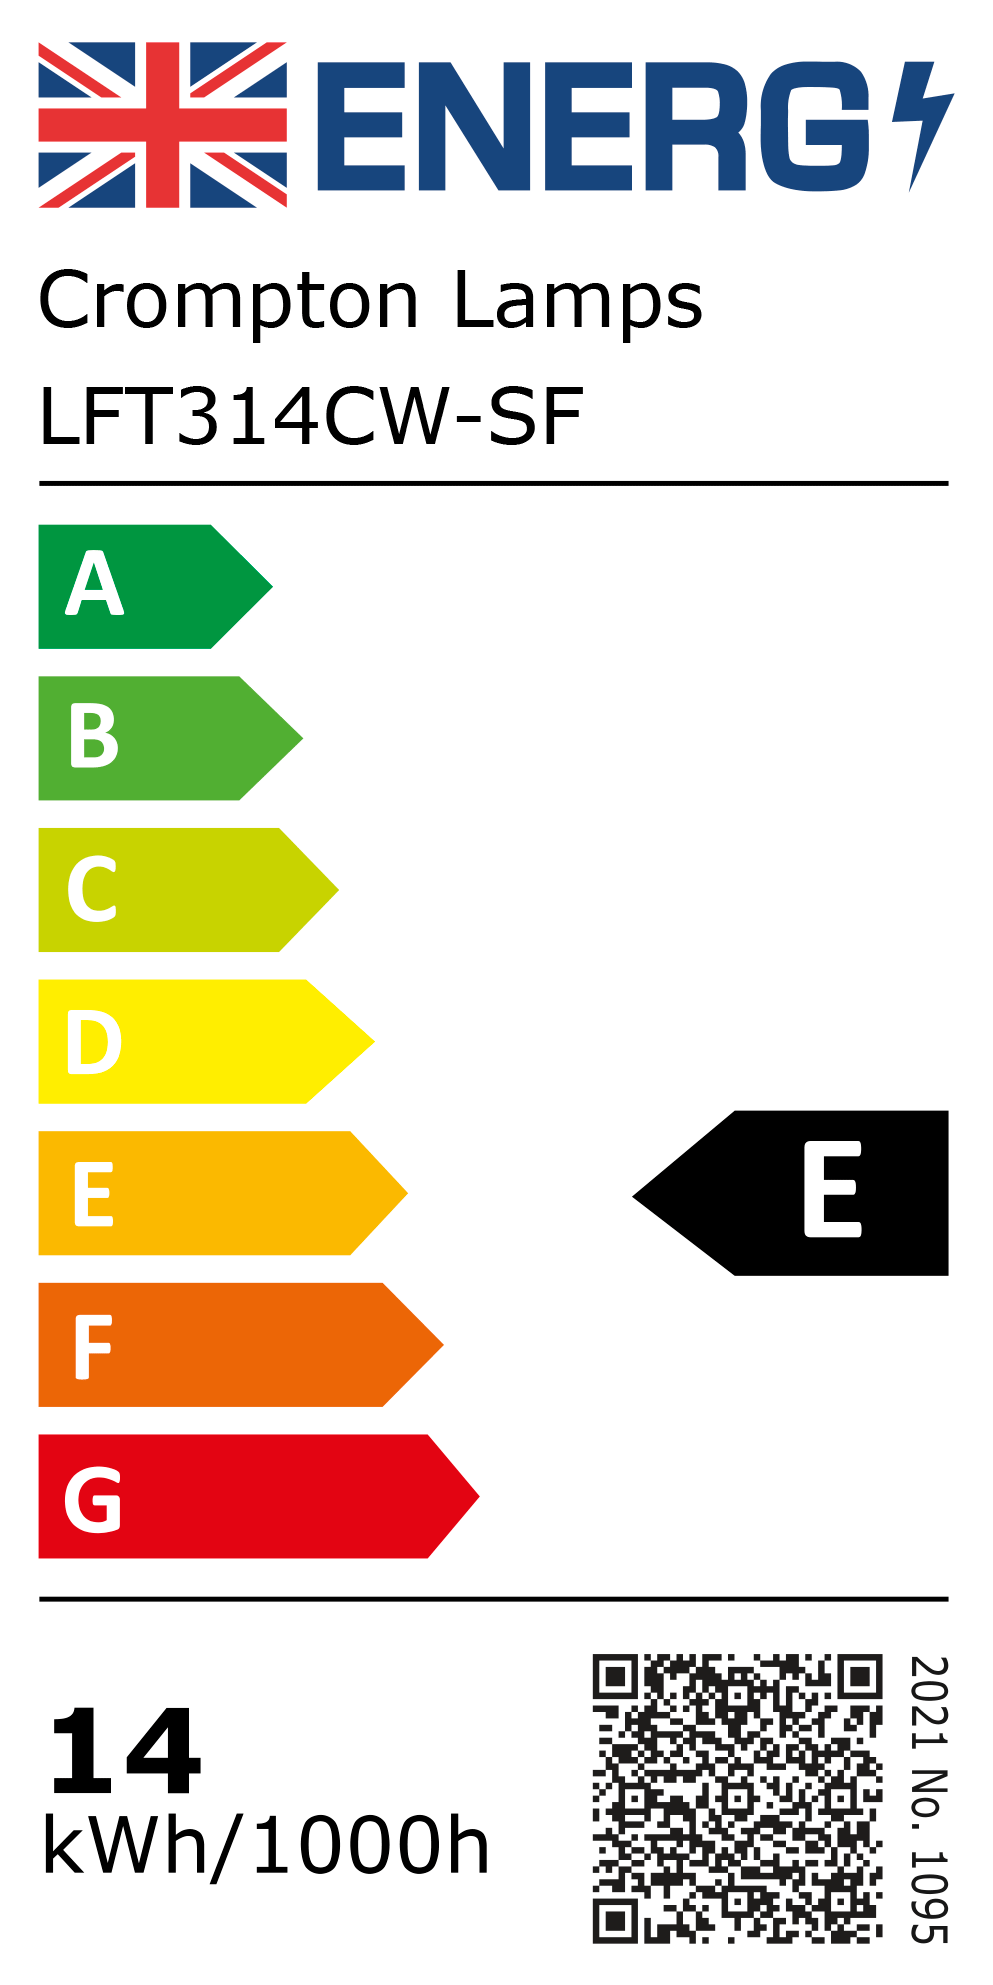 New 2021 Energy Rating Label: Stock Code LFT314CW-SF